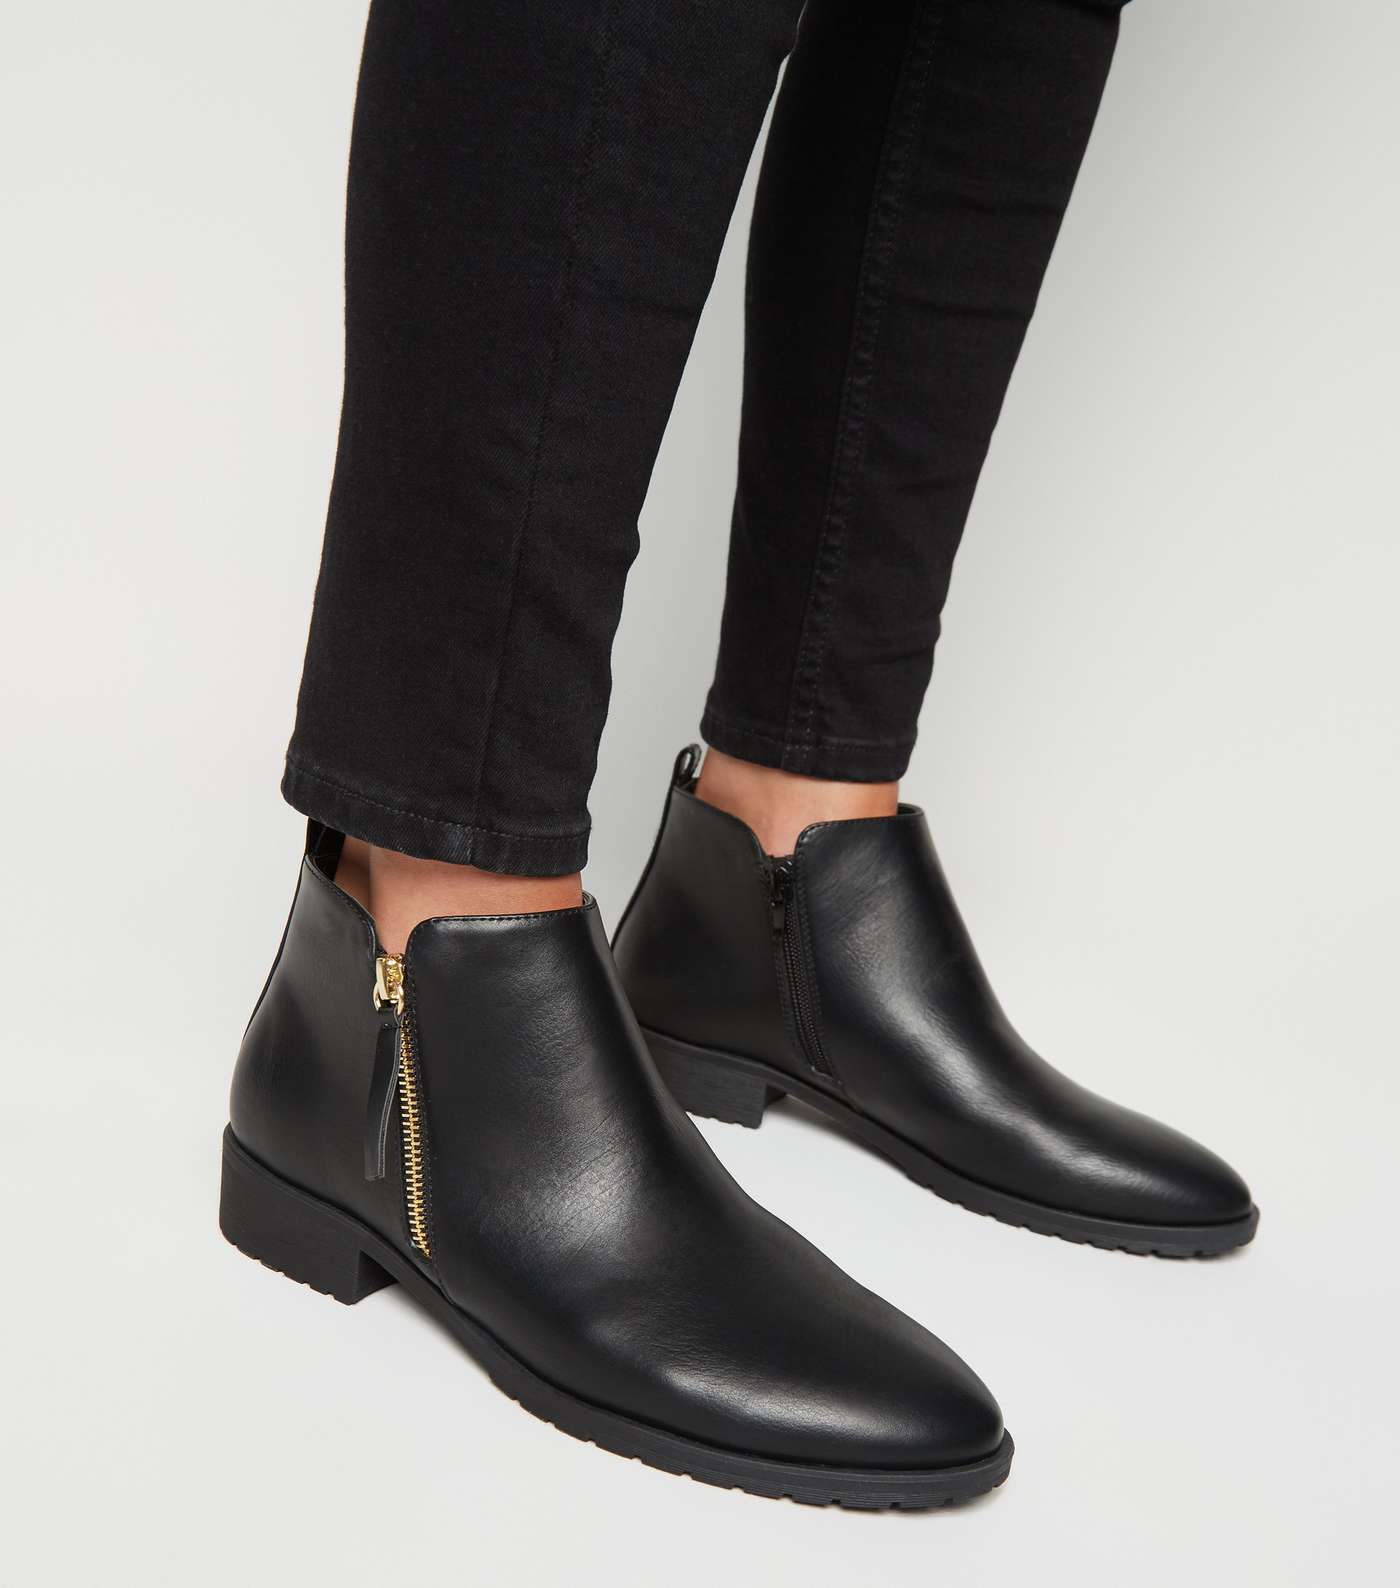 Black Leather-Look Zip Side Chelsea Boots Image 2